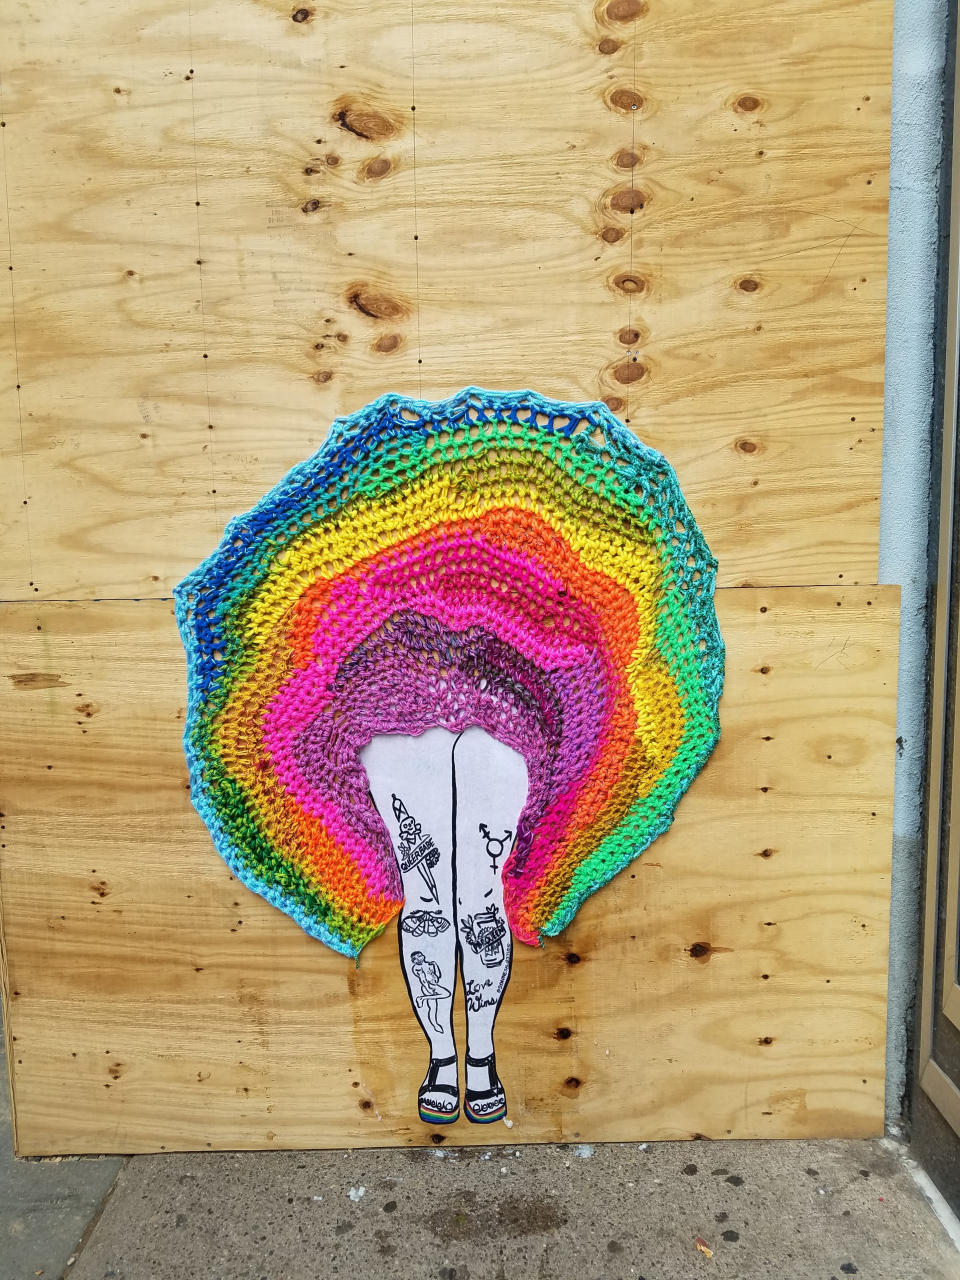 This May 2019 photo provided by Nicole Nikolich shows a collaborative street art installation between Nikolich and Symmone Salib, a painter and street artist, on a wooden wall in Center City, Philadelphia, Pa. This piece was created to celebrate Philly pride month. Knitters and crocheters call it yarn bombing. They're using fiber arts to make political statements, or maybe just to lift people's spirits. Experts say yarn bombing is part of a long tradition in which women use textile arts to agitate, excite or inspire. (Nicole Nikolich/Lace In The Moon via AP)